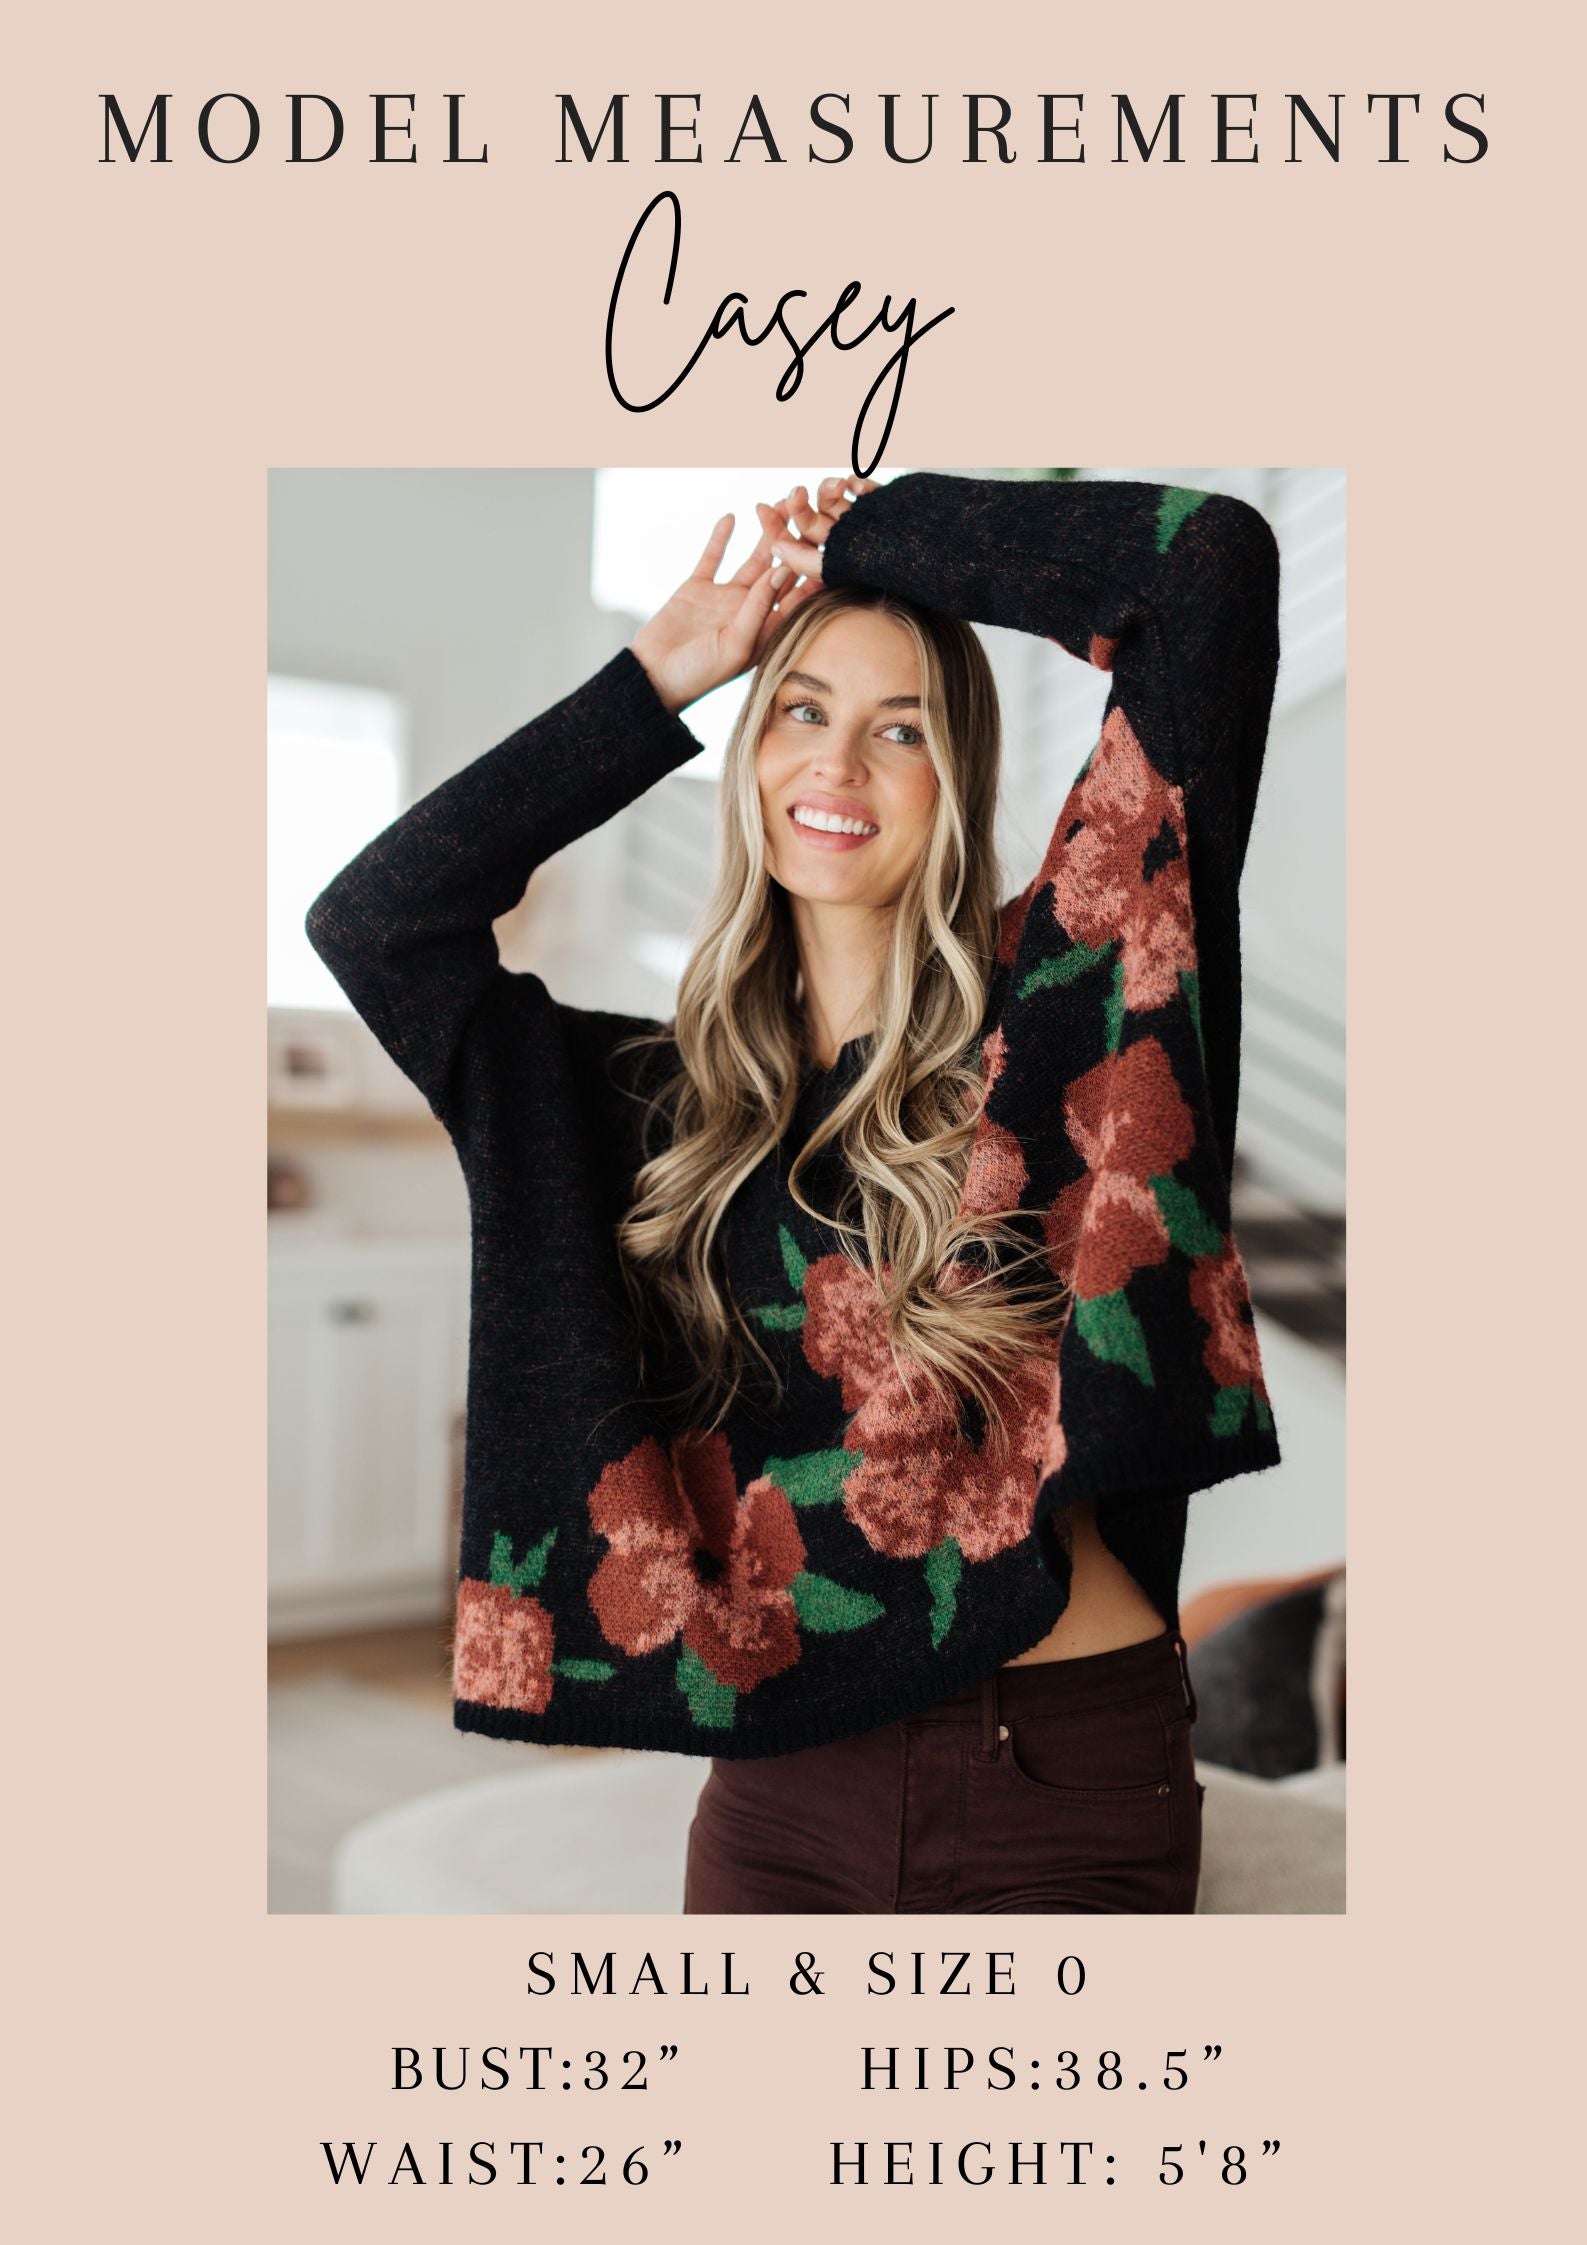 Enough Anyways Floral Cardigan in Pink - FamFancy Boutique